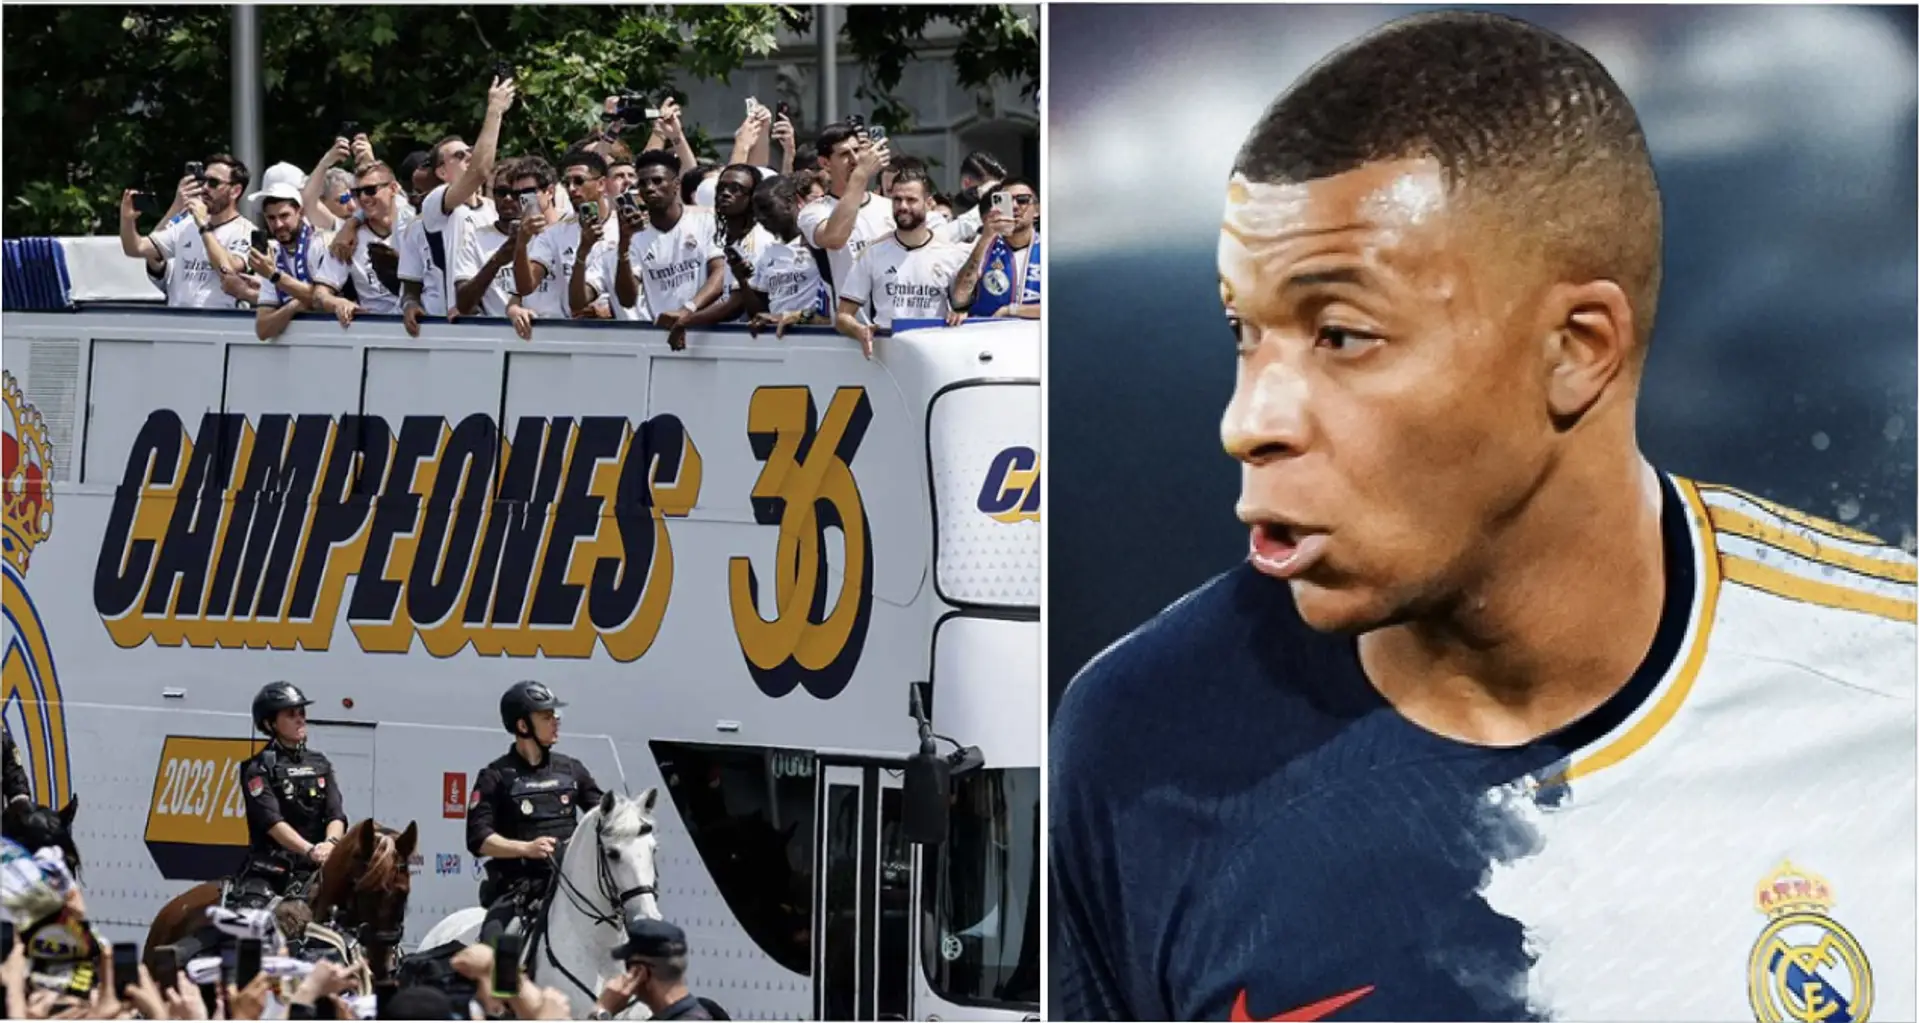 Mbappe's salary at Real Madrid revealed at and 2 more big stories you might've missed